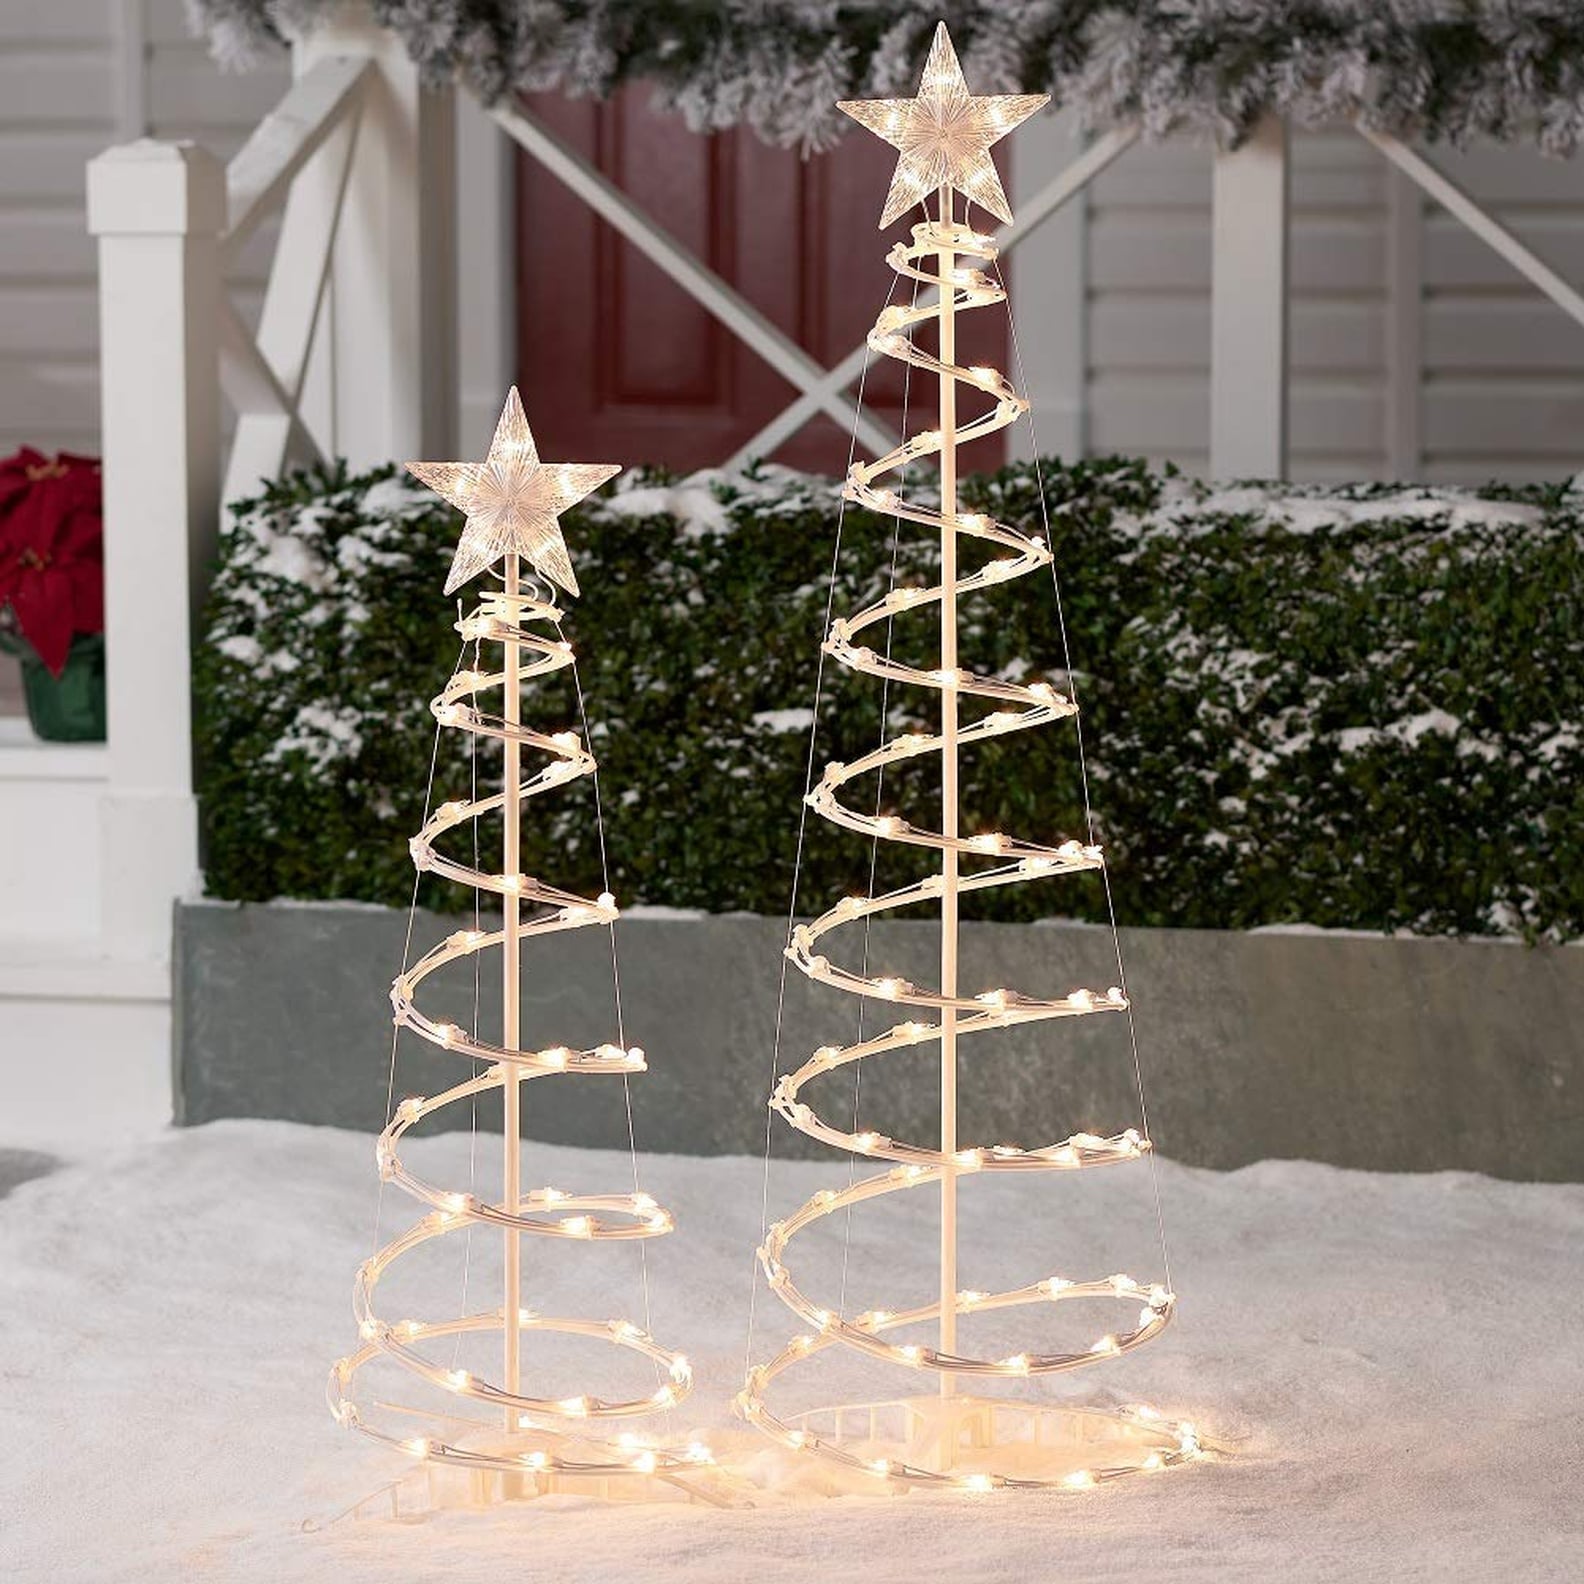 The 50 Best Outdoor Christmas Decorations on Amazon 2019 | POPSUGAR Home